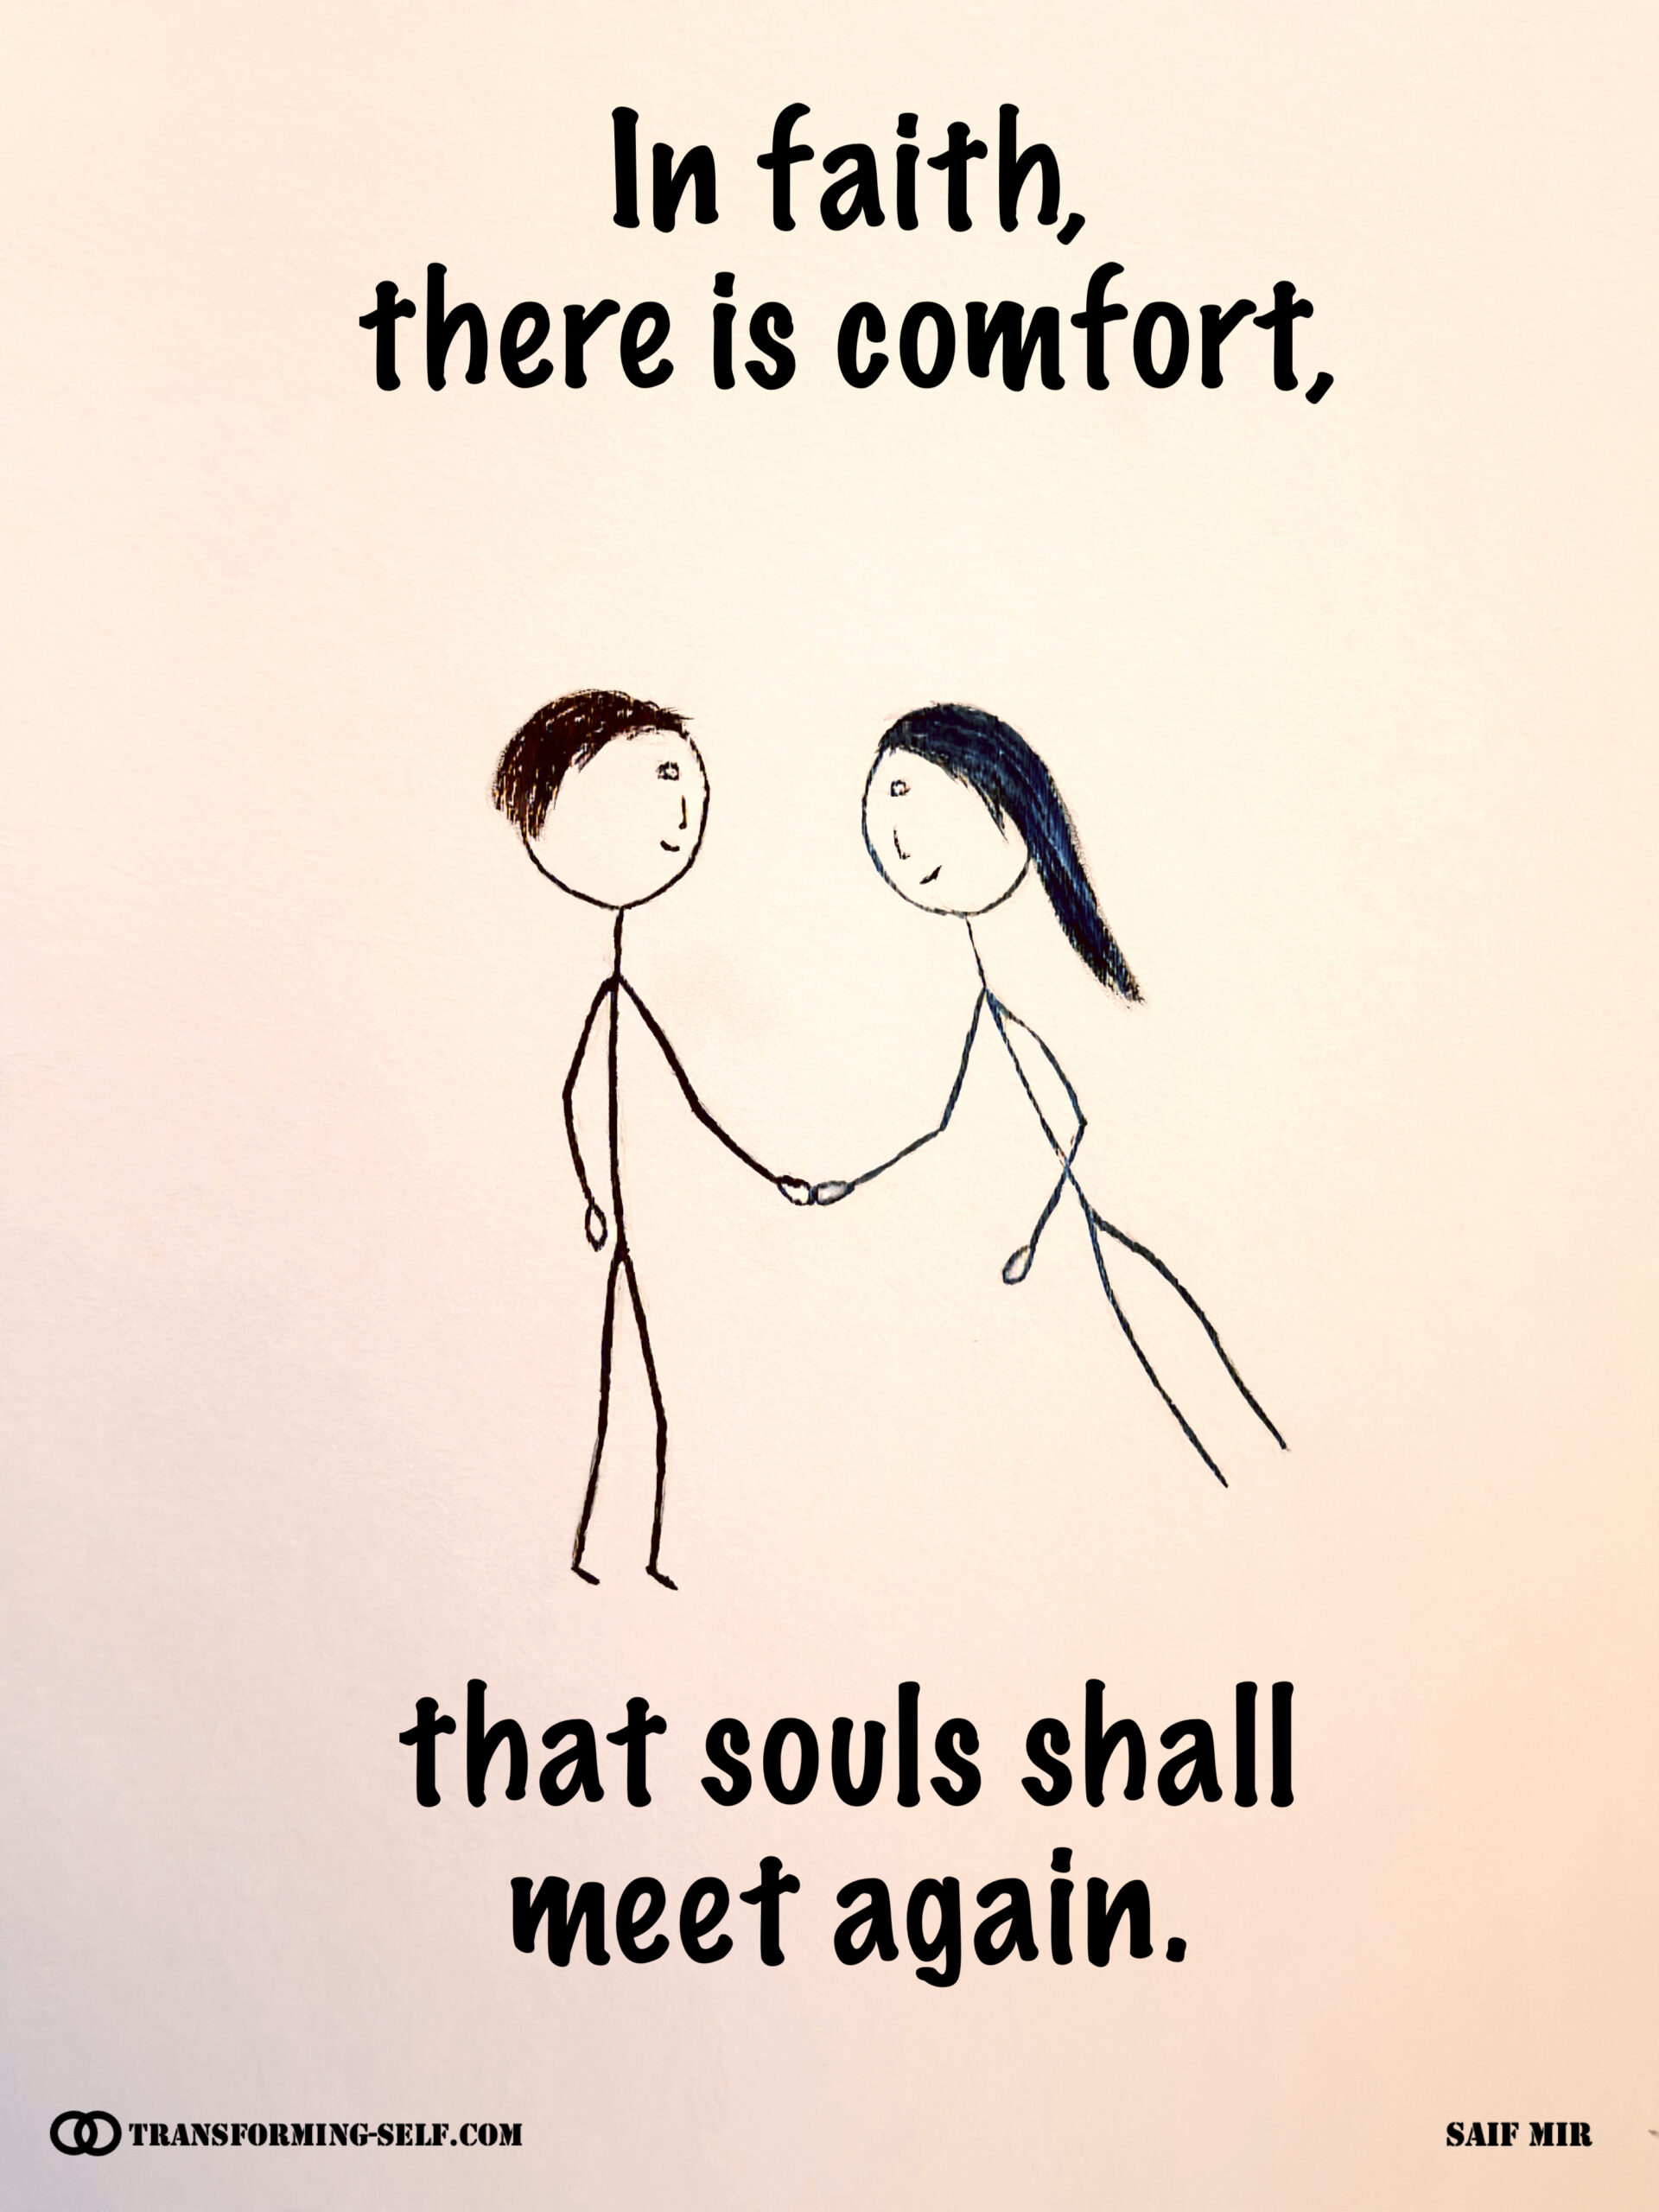 In faith, there is comfort, that souls shall meet again